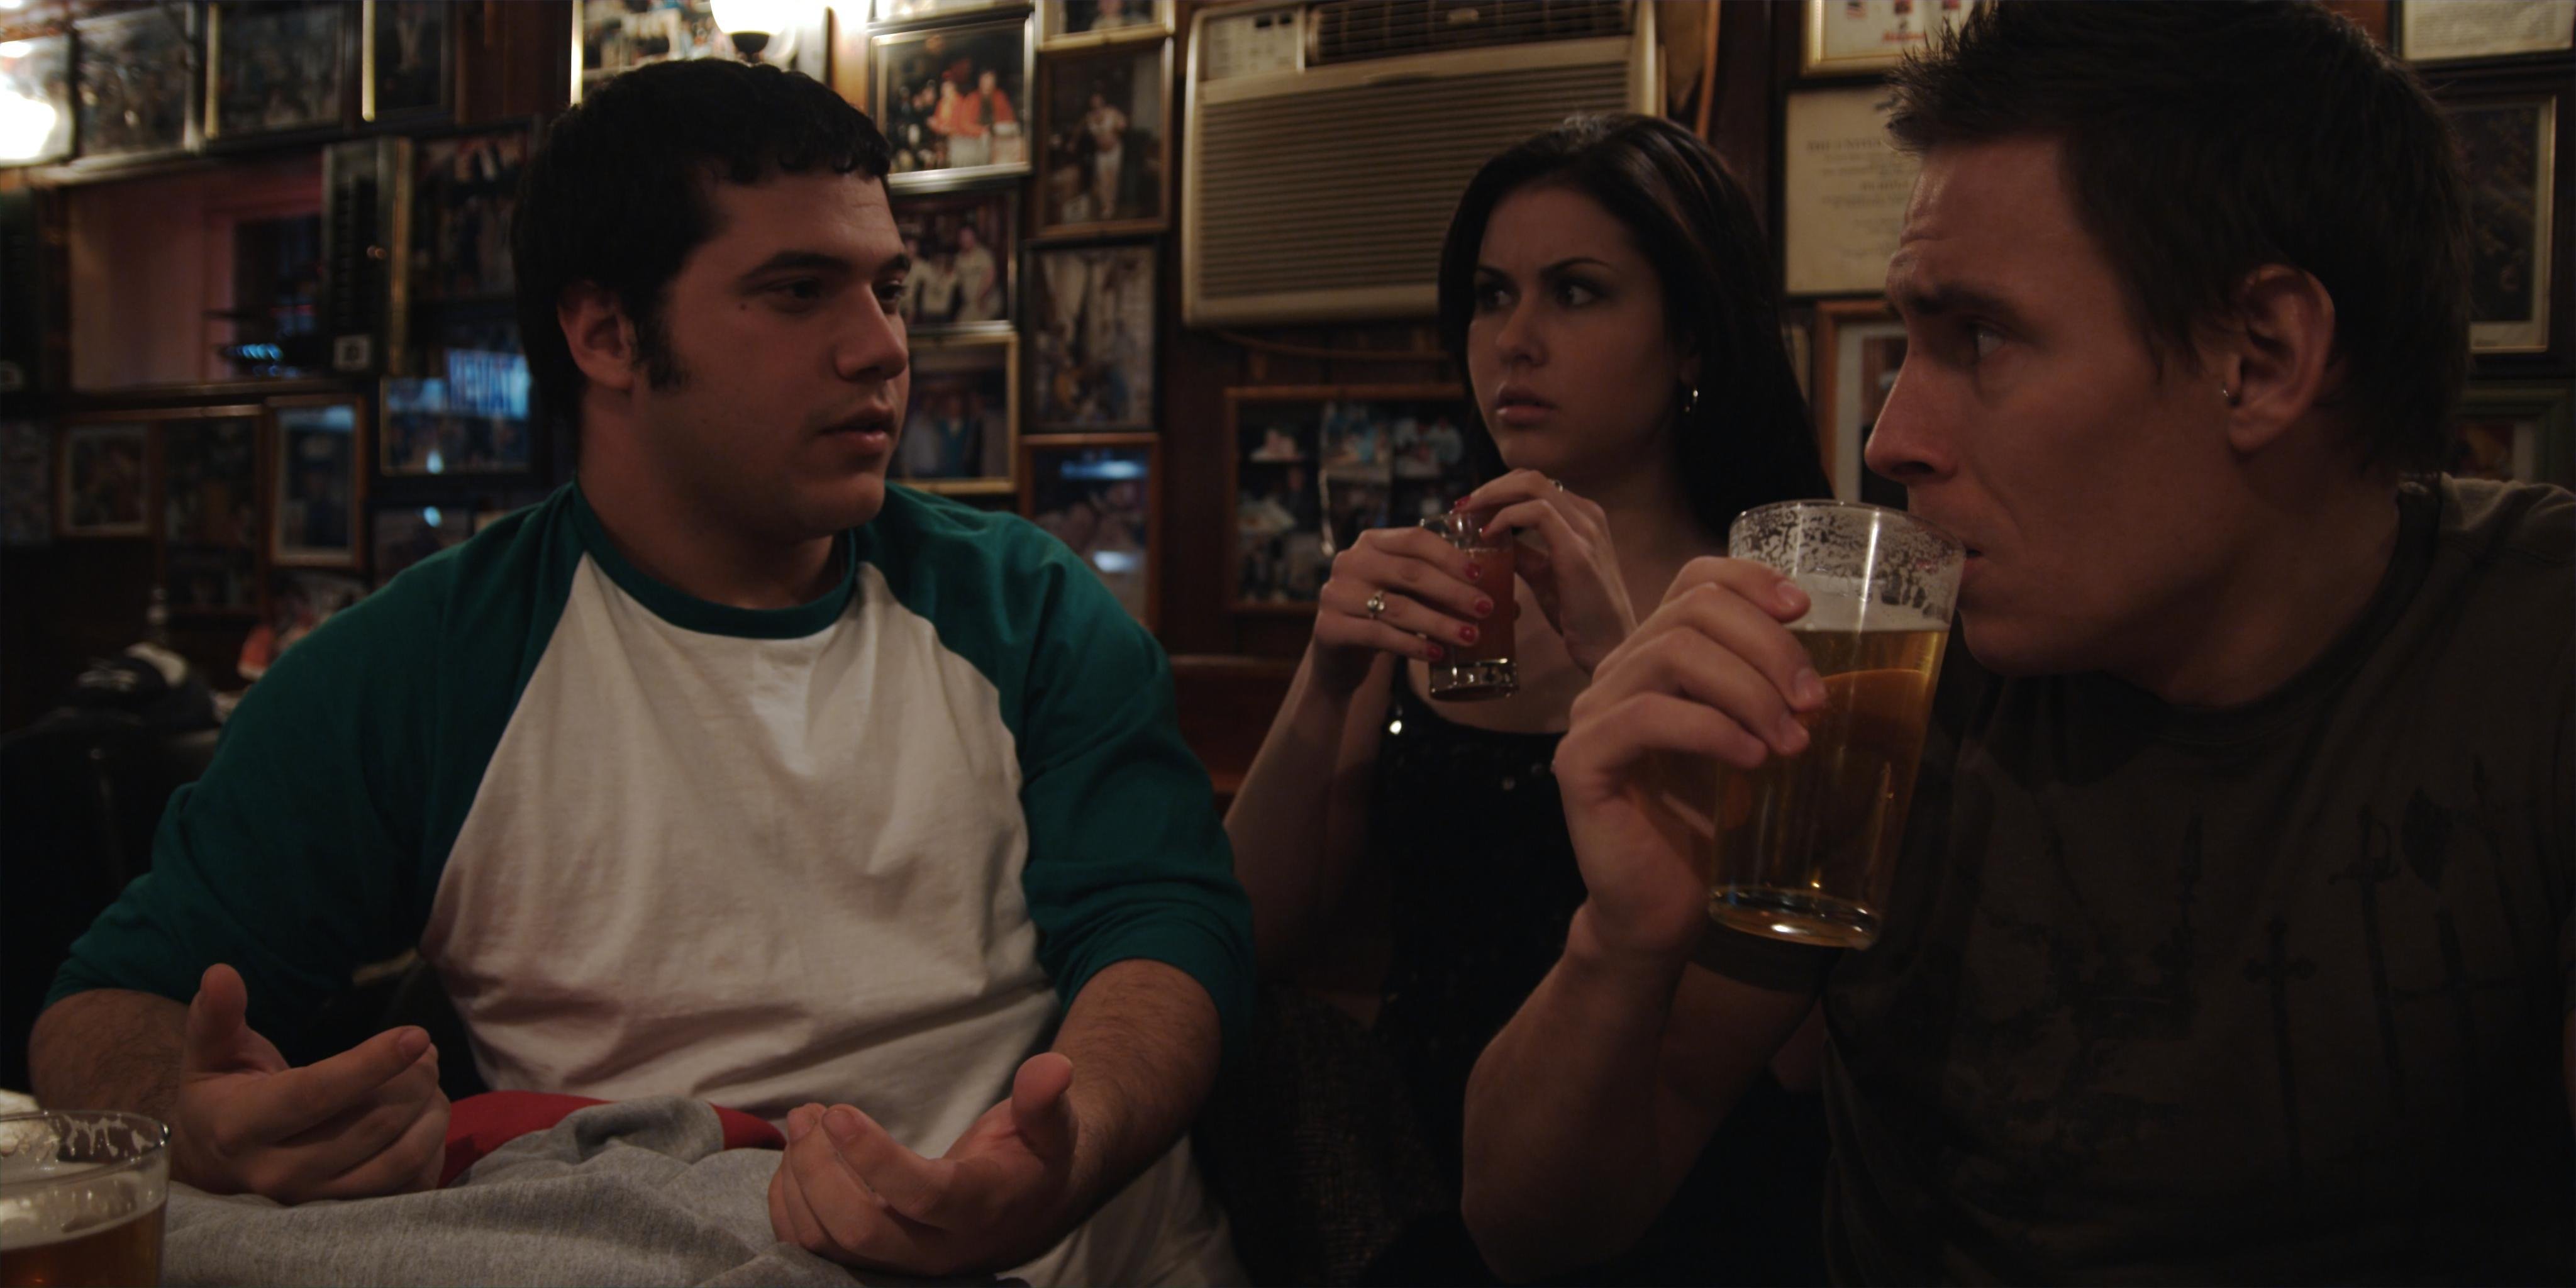 Screen shot from the bar scene of Swooped with characters Jack, Julia, and Stan.